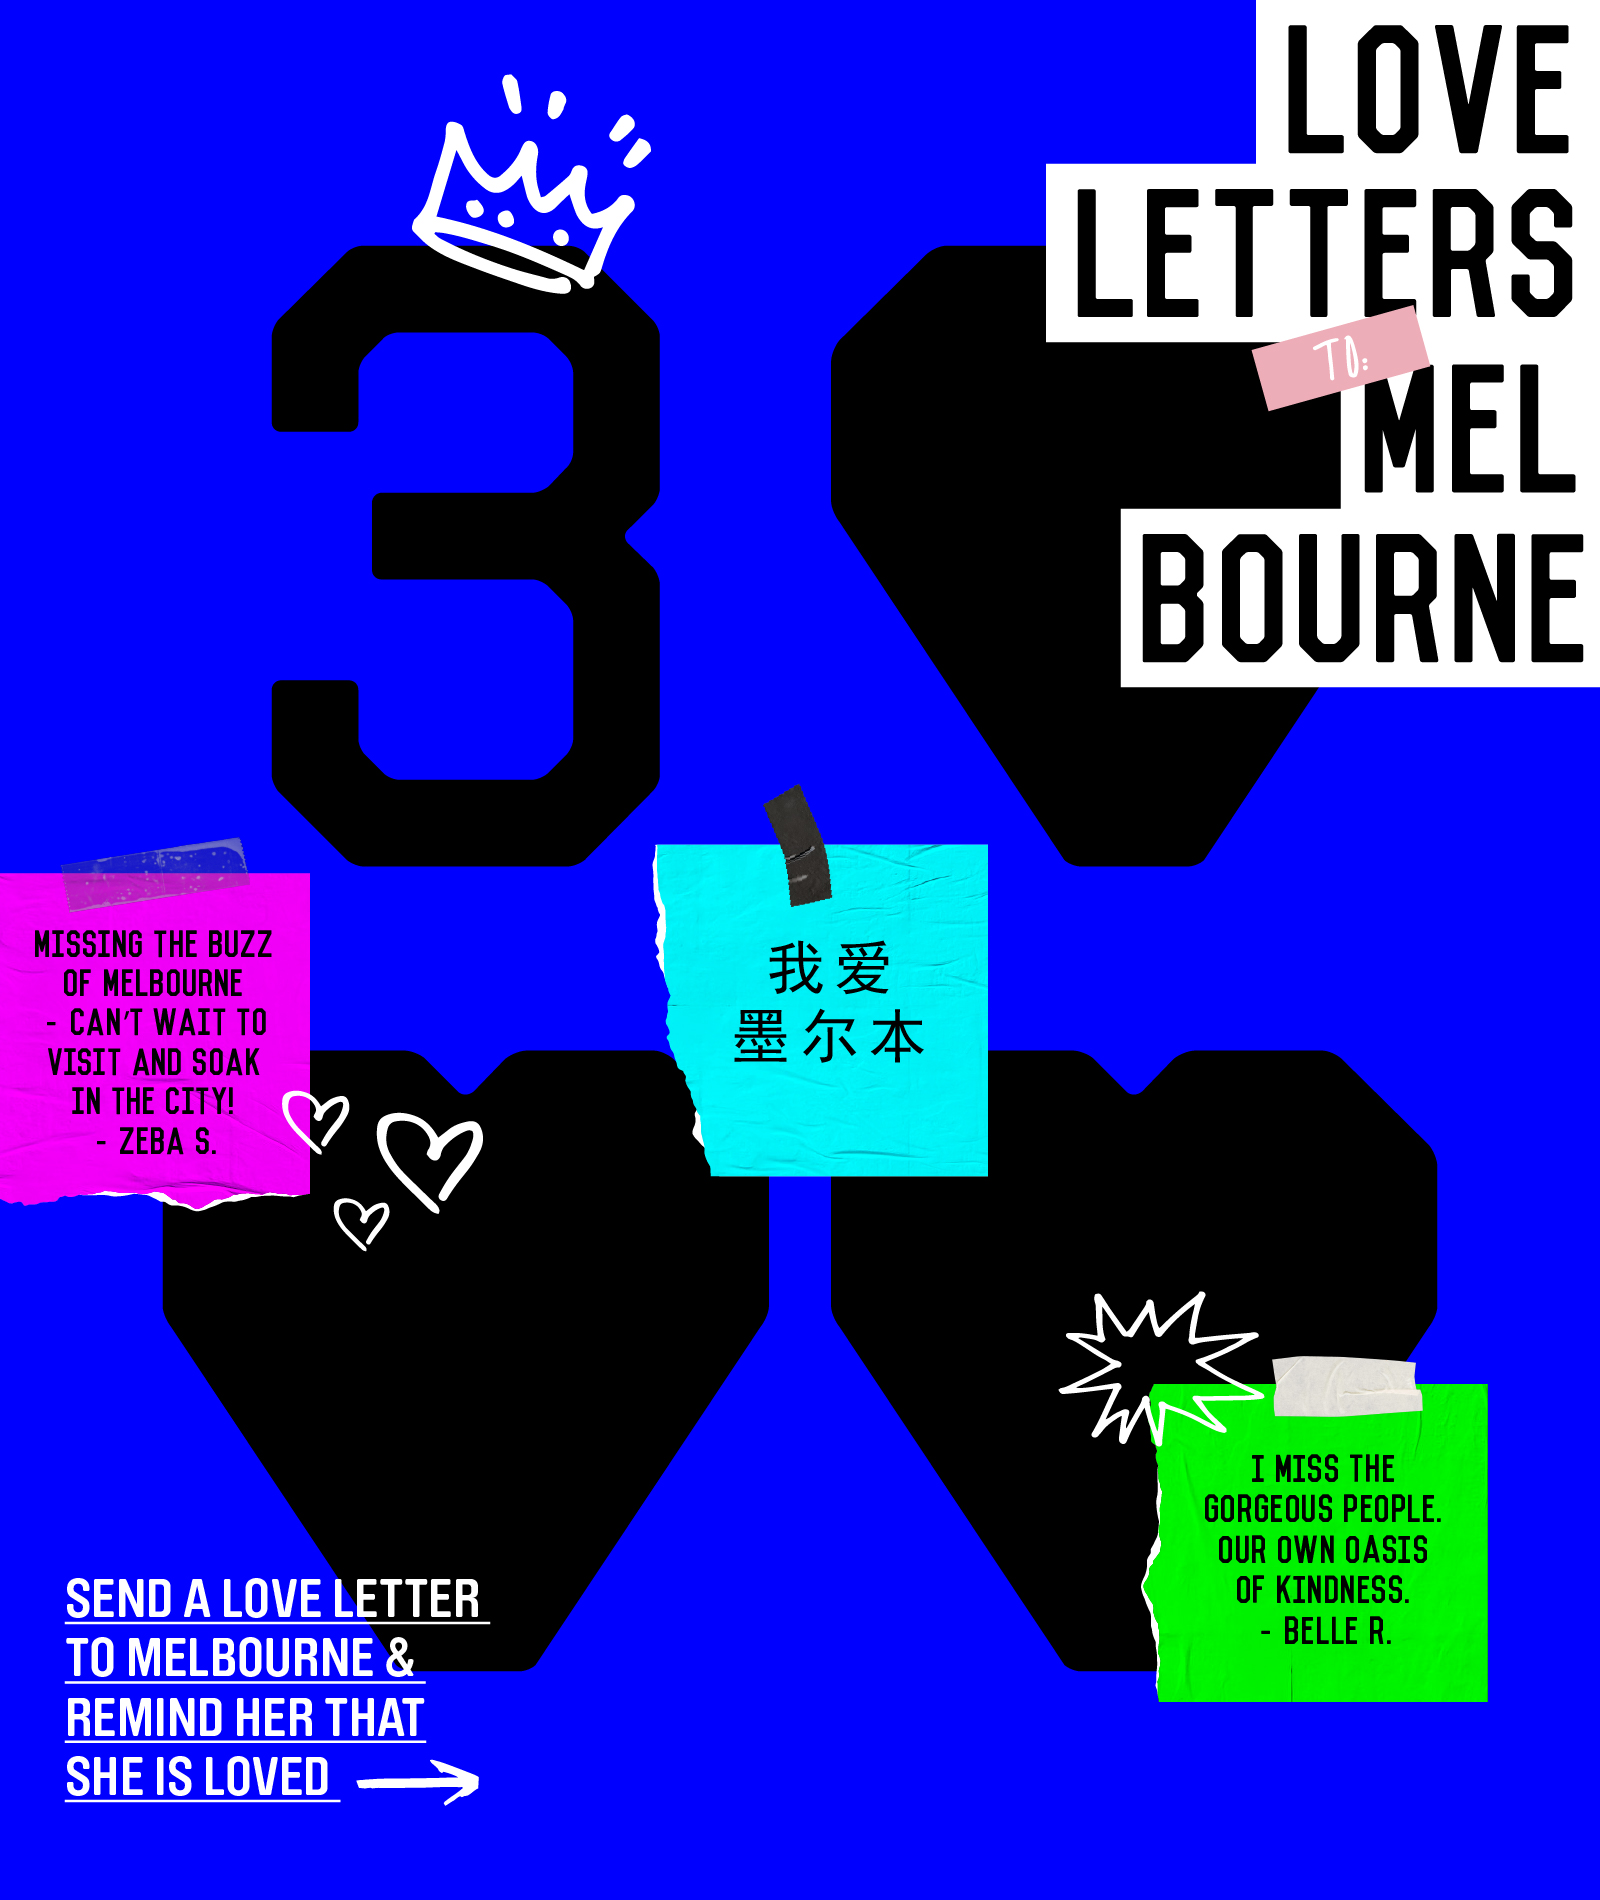 Love Letters to Melbourne